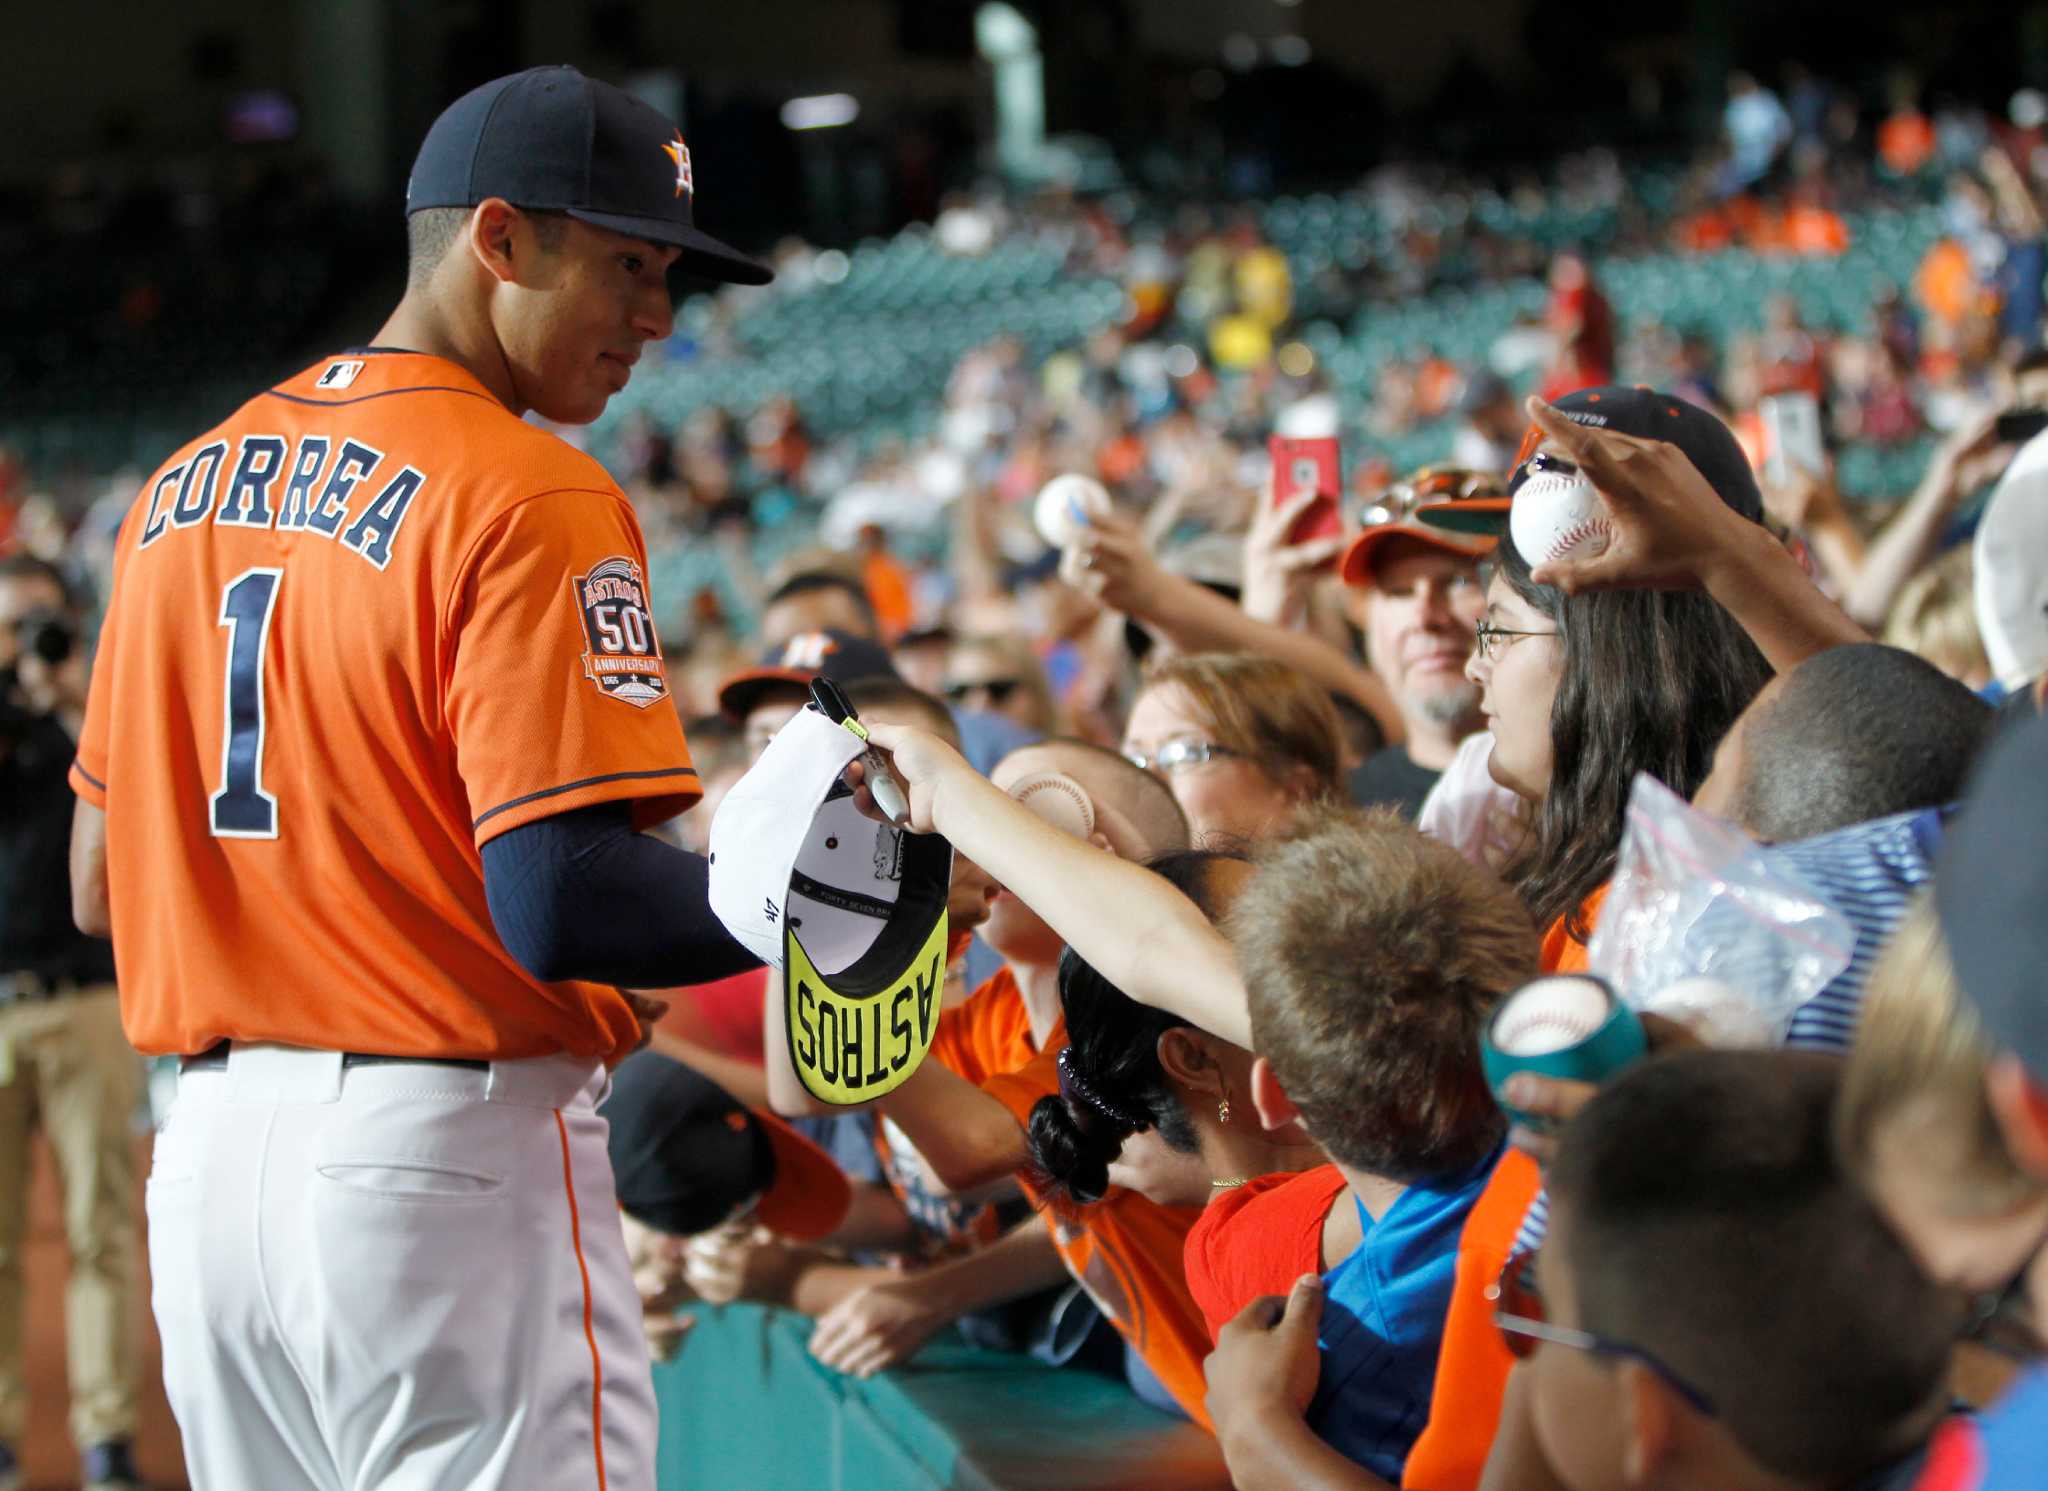 Correa shows the power to enchant fans right off the bat